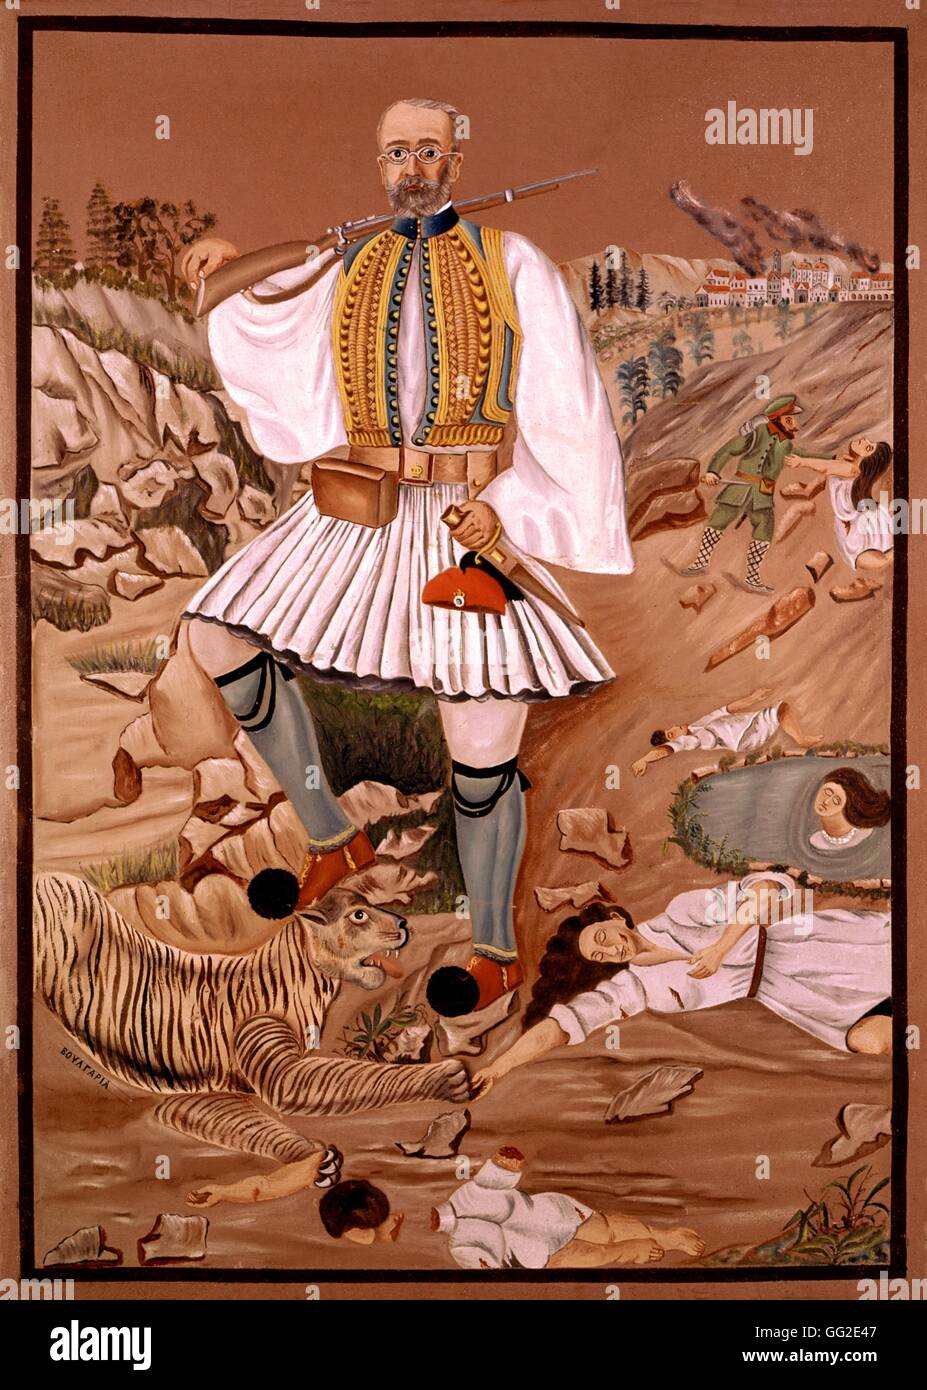 Greek popular print. Venizelos (1864-1936), hero ot the Greek independence war, in traditional costume. The tiger represents bloodthirsty Bulgaria Greece - Balkan war Athens, Private collection Stock Photo